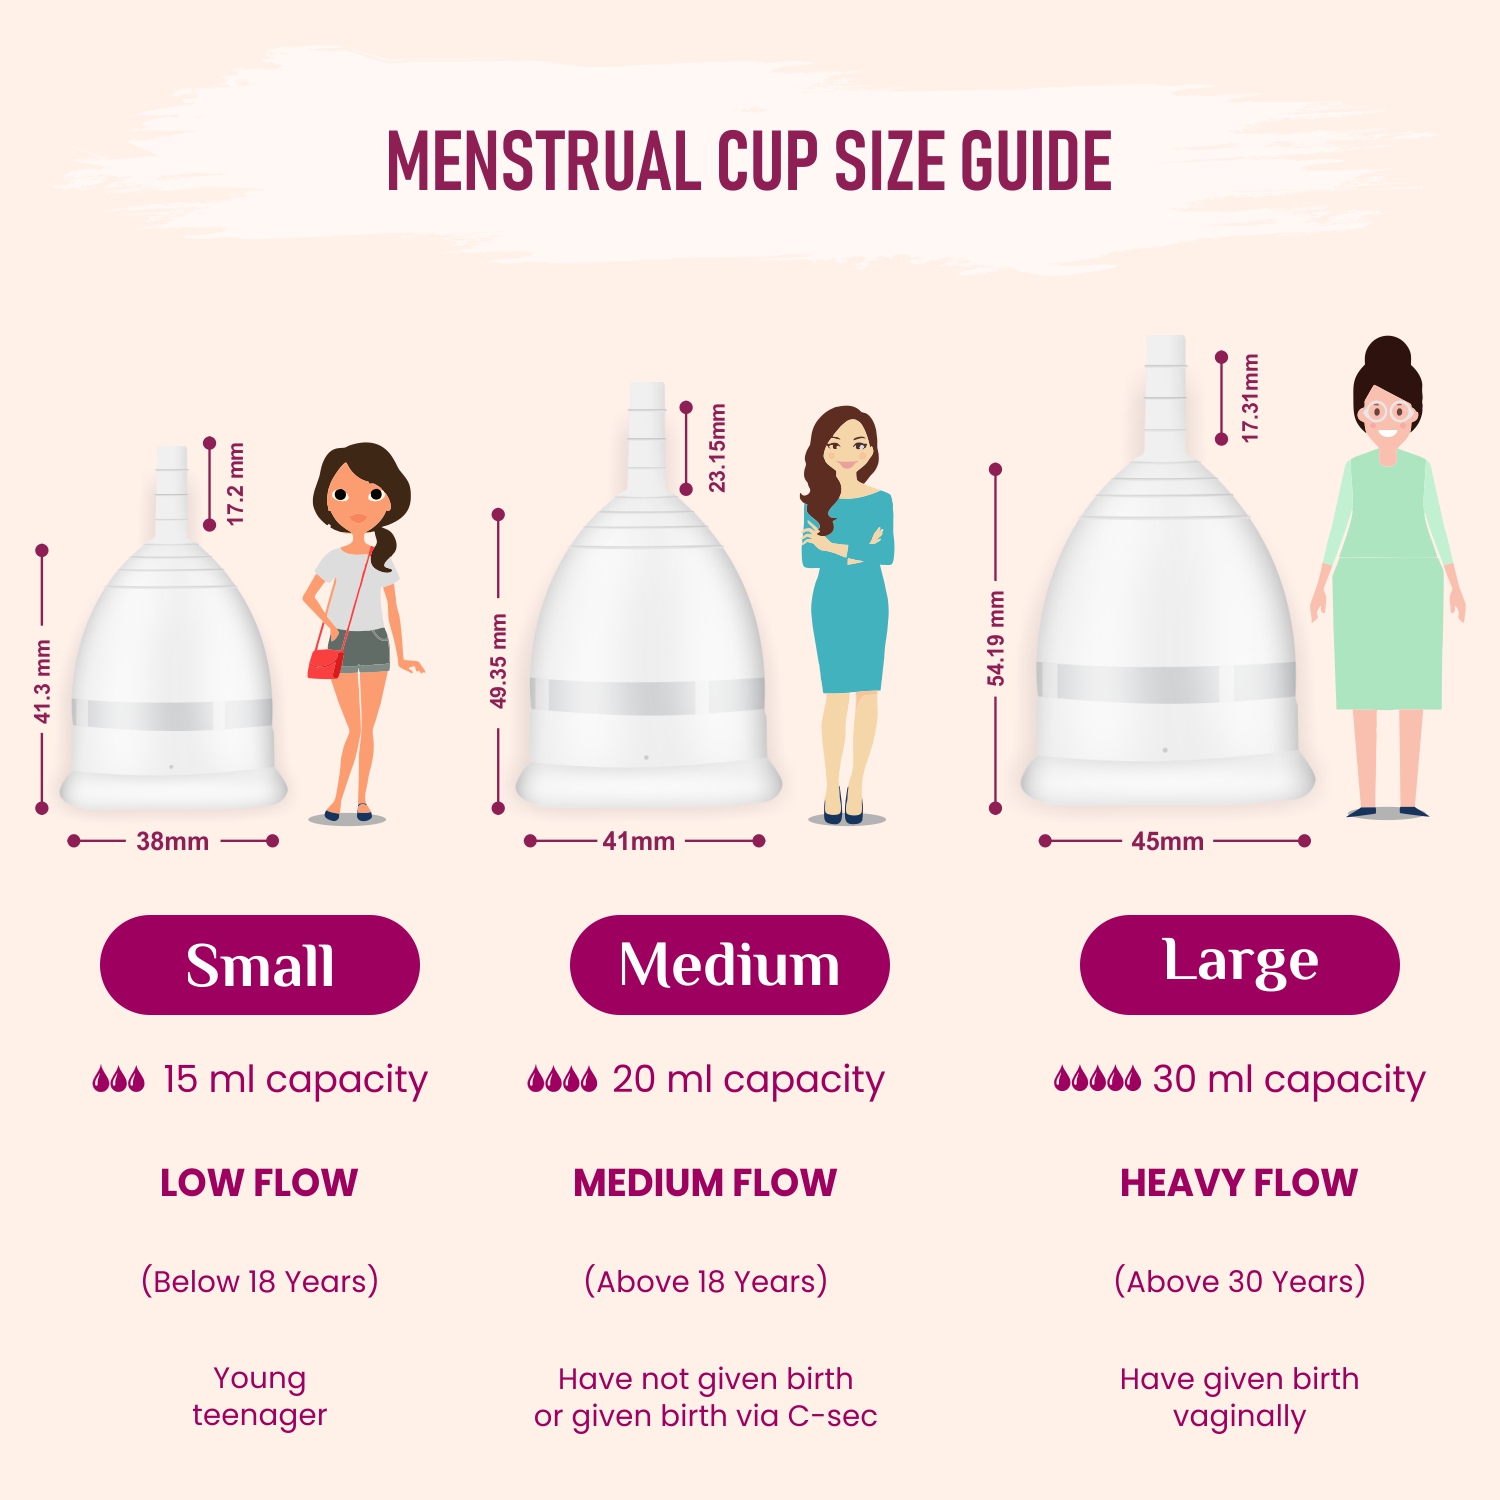 GynoCup Reusable Menstrual Cup For Women Safe, Easy-to-Use & Comfortable, No Leakage, Protection